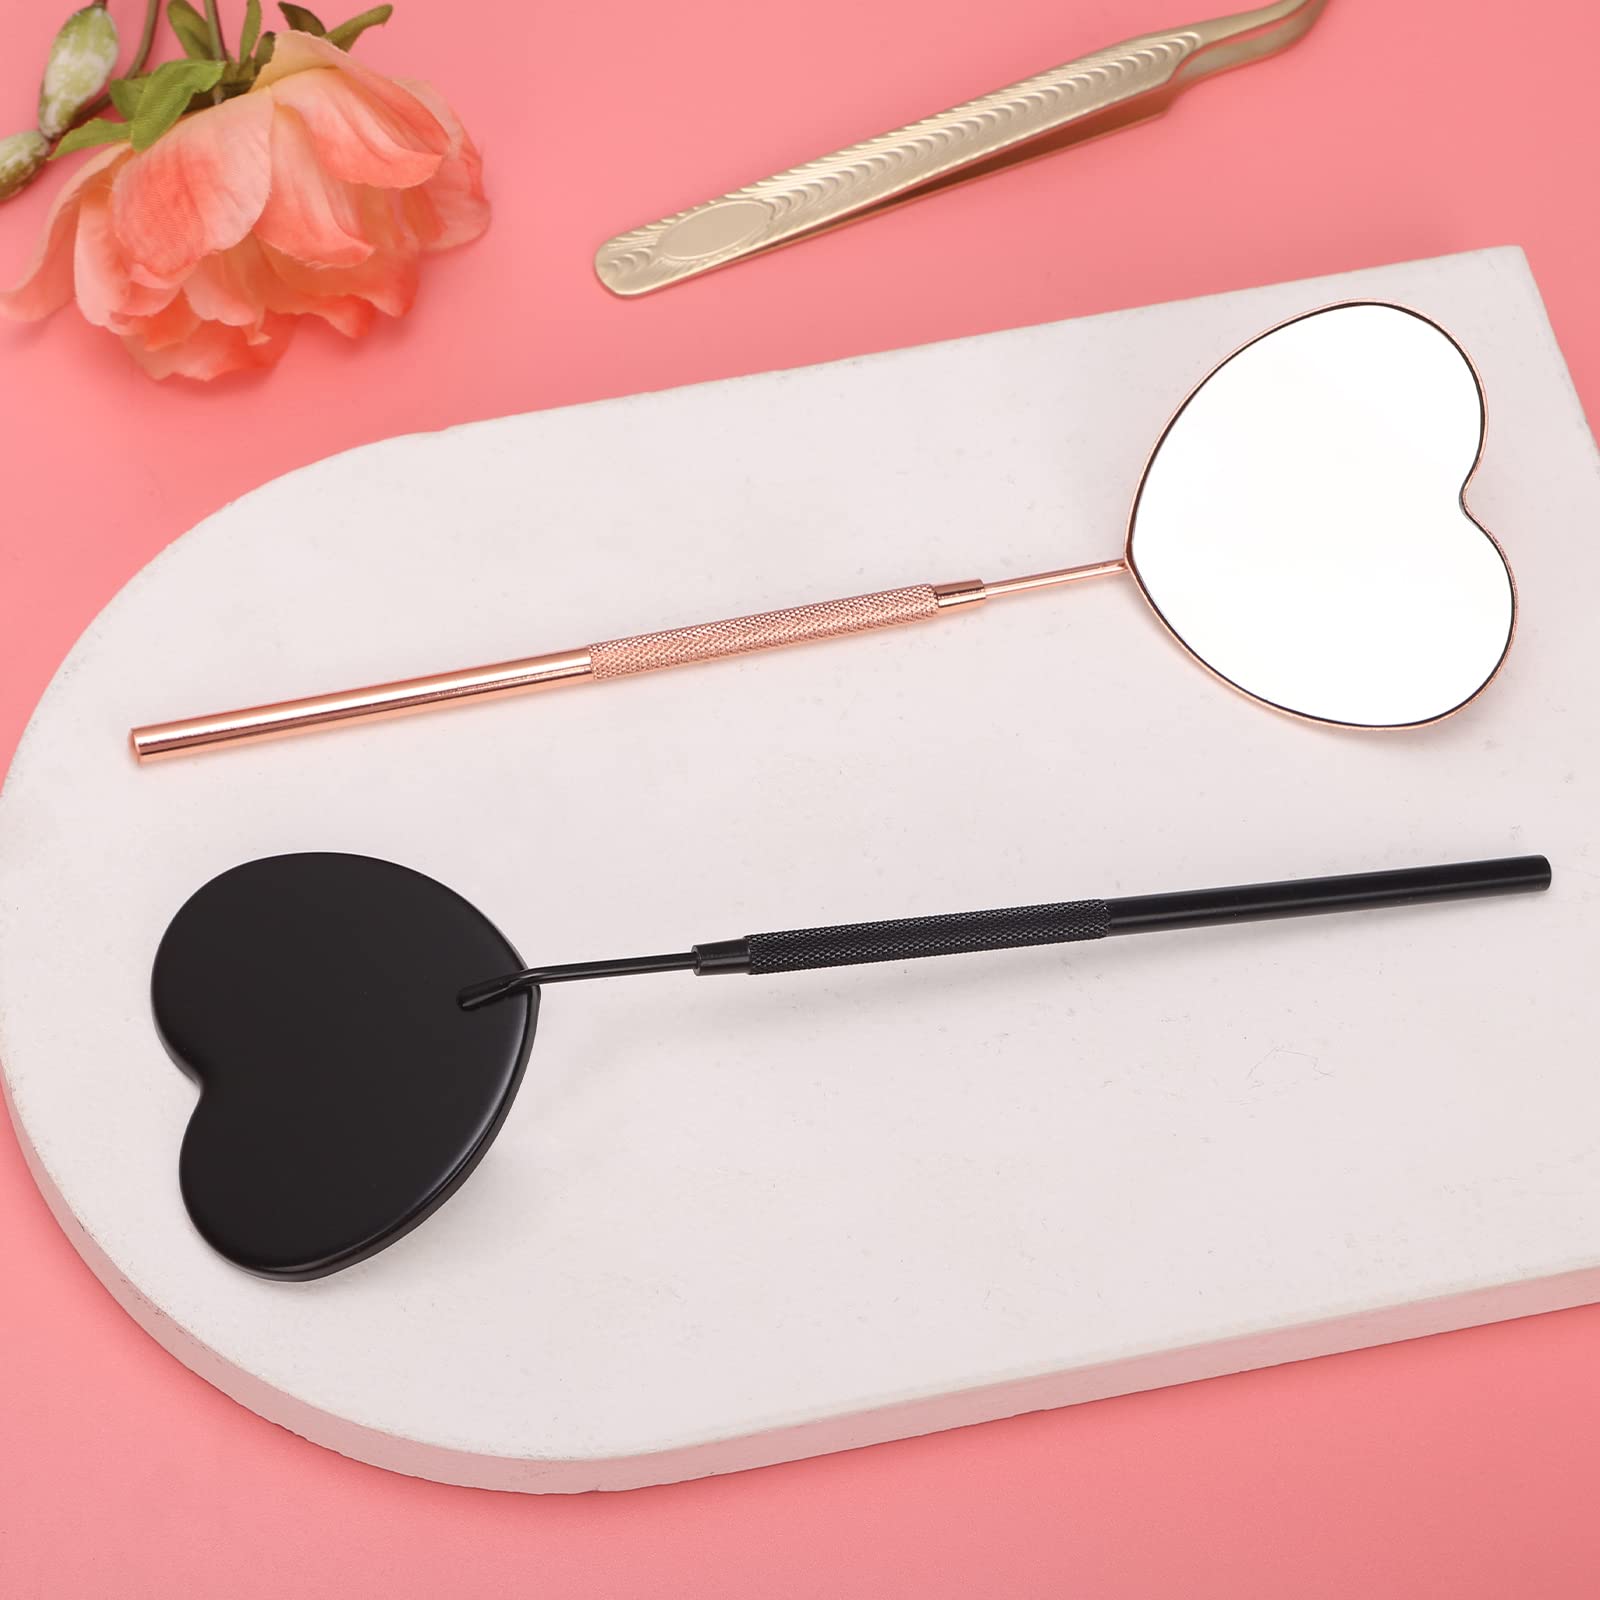 Miuffue 2.2inch Lovely Lash Mirror, Heart Shaped Detachable Stainless Steel Eyelash Mirror, Lash Mirror for Eyelash Extensions, Lash Extension Supplies and Tool for Lash Techs, Rose Gold